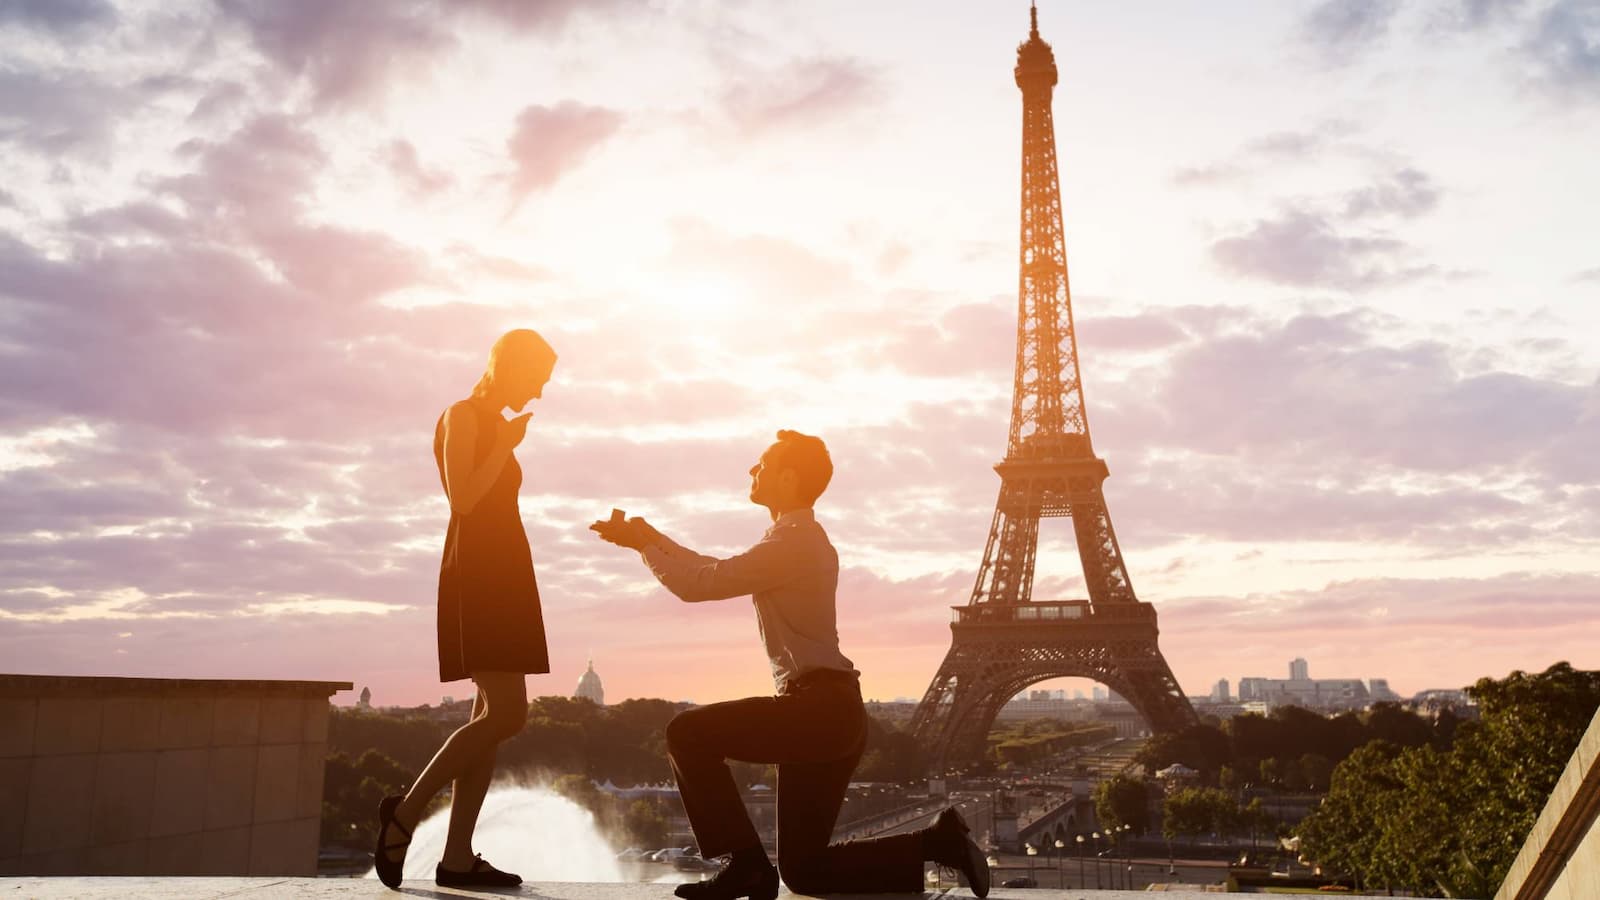 The Art of Proposing, how to propose, proposing tips